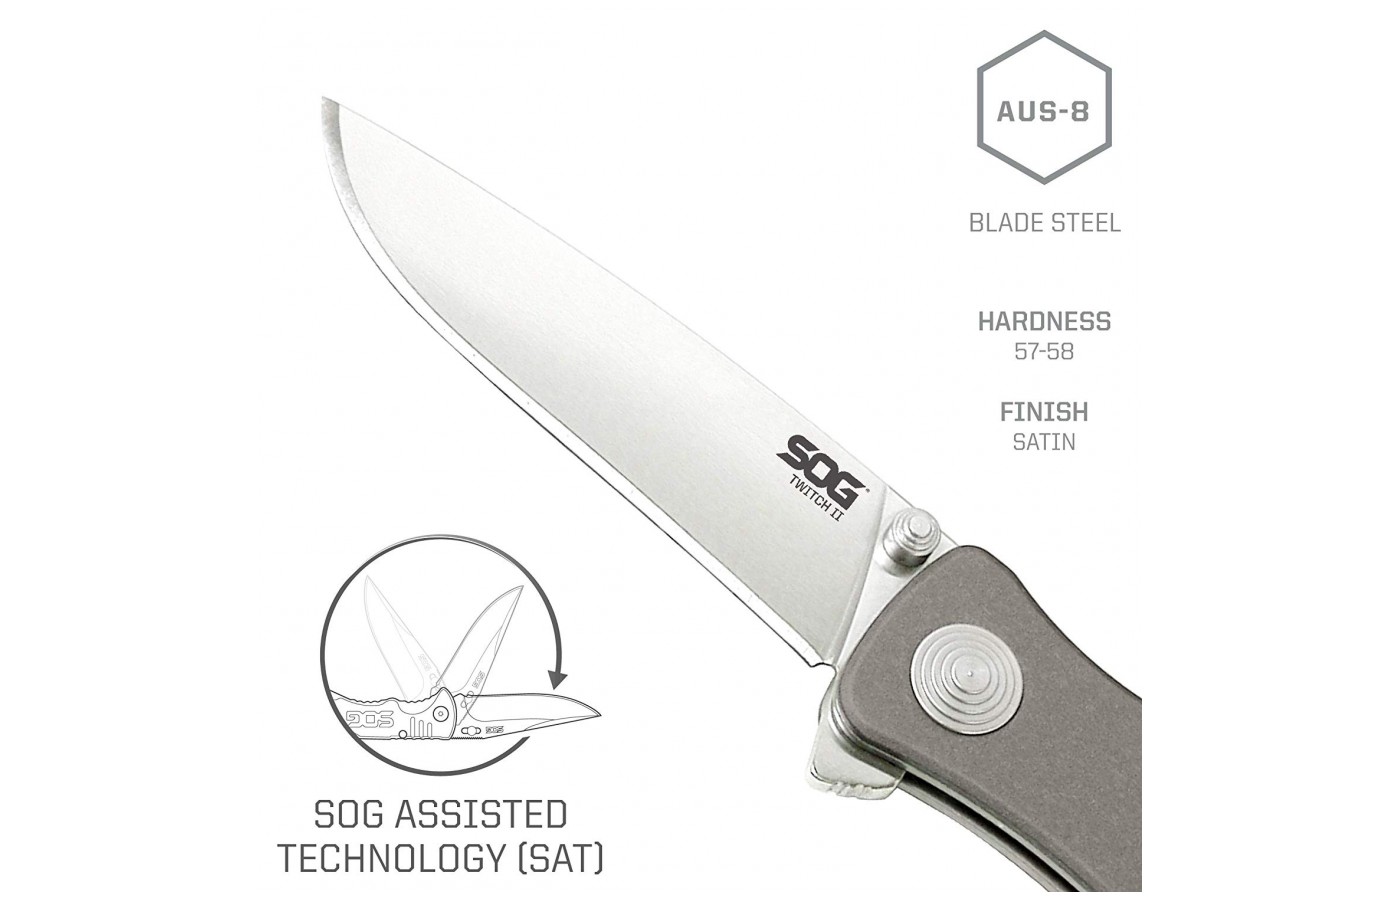 It also uses the branded SOG Assisted Technology, also known as the S.A.T. which helps the knife open. 